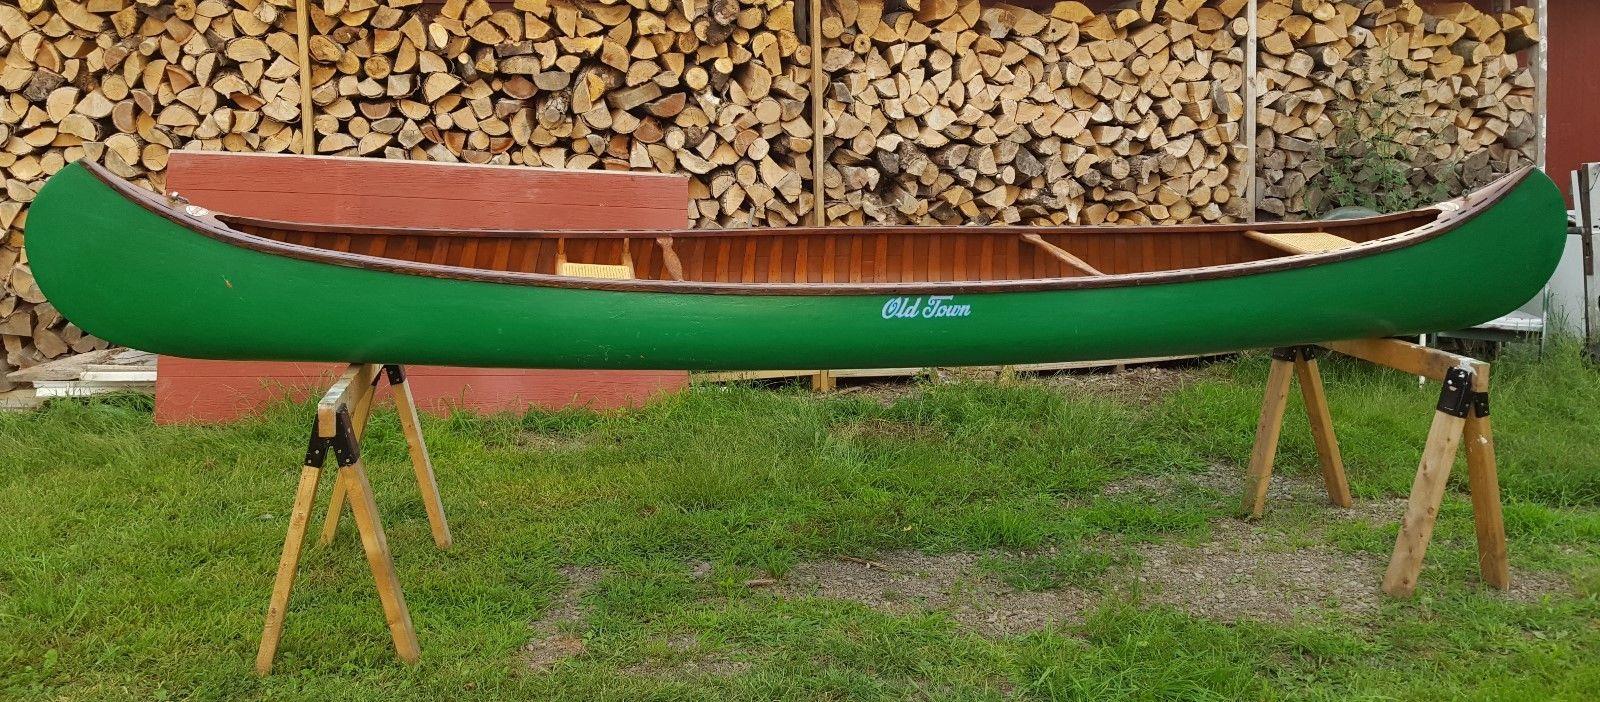 Beautiful 1943 Old Town Canoe 16 ft Vintage Antique